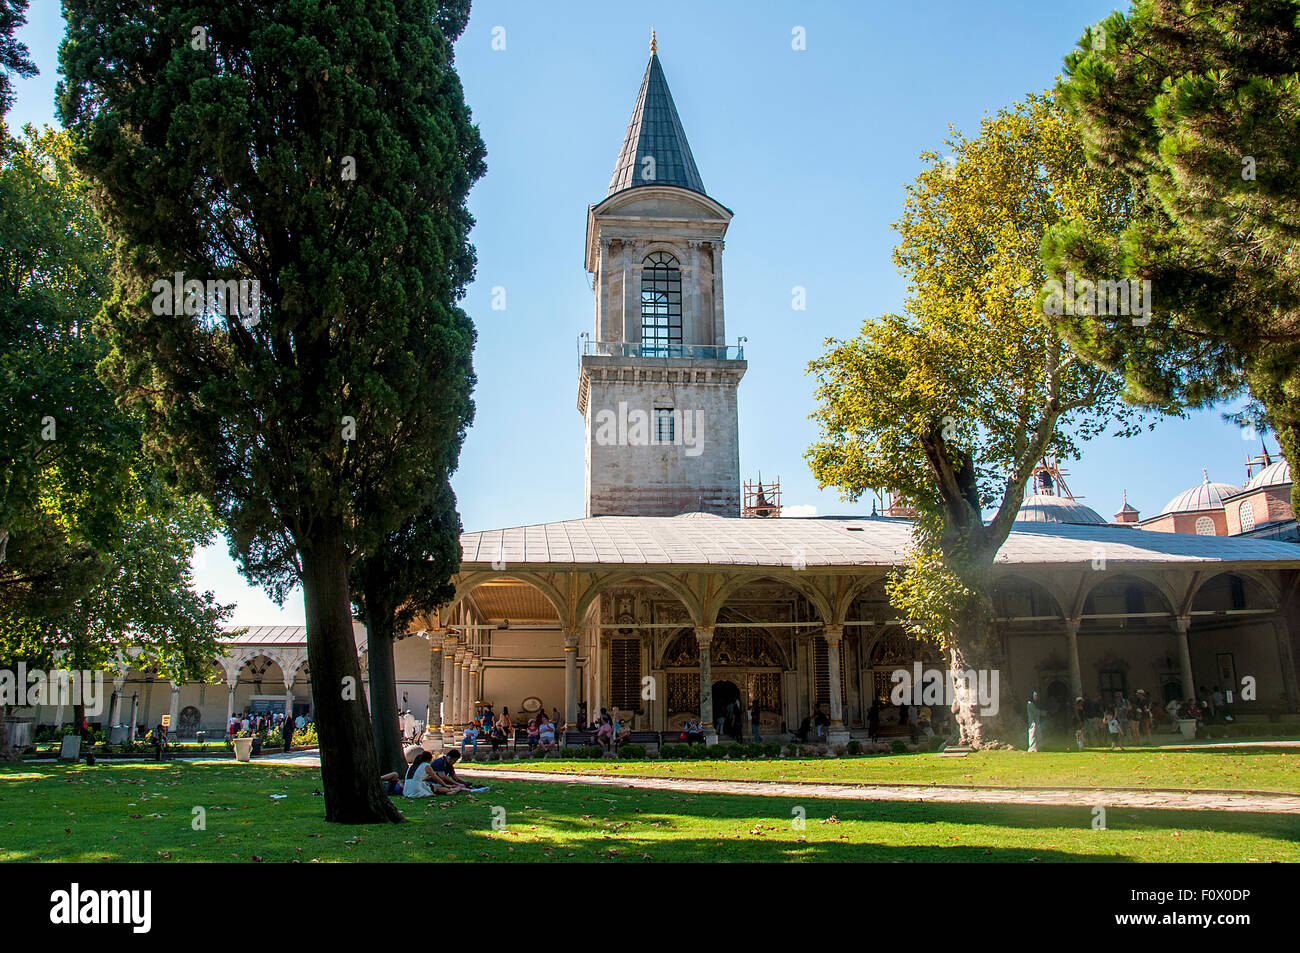 Istanbul, Turkey - August 19, 2015: Tower of Justice in the Second Courtyard of the Topkapi Palace, Istanbul, Turkey. It was the Stock Photo